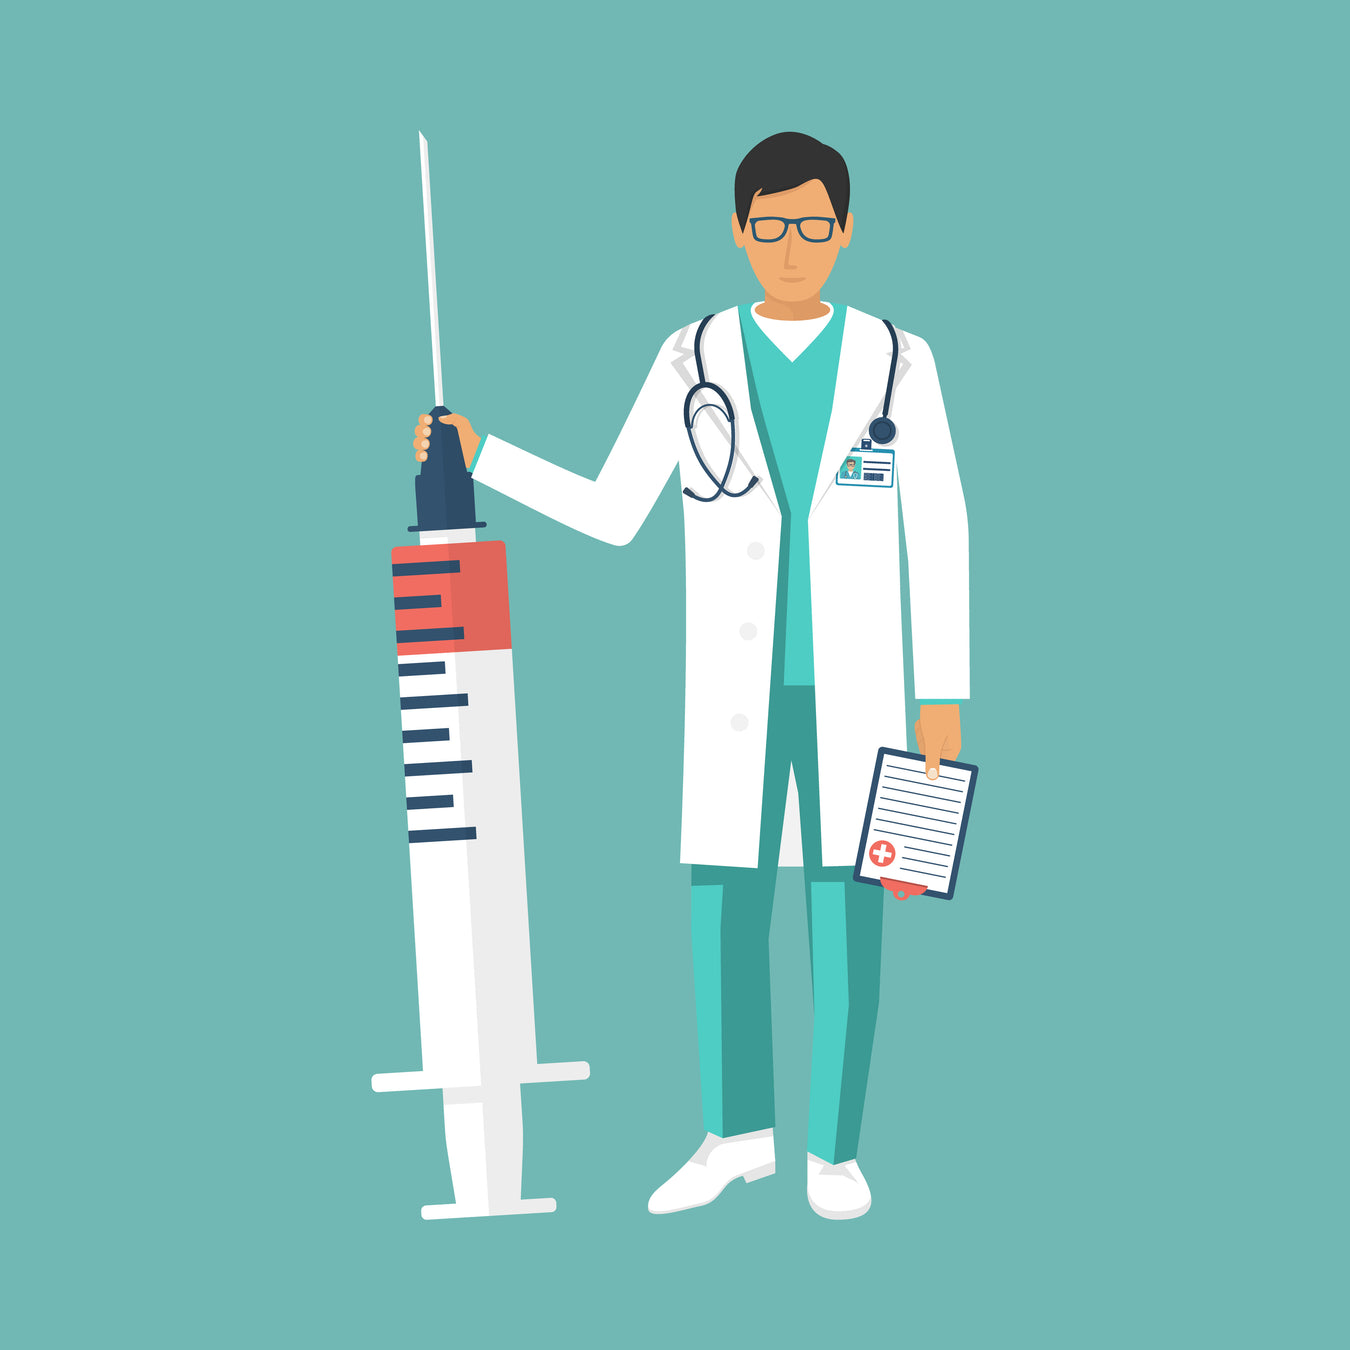 An illustration of a doctor holding a clipboard standing next to a syringe.